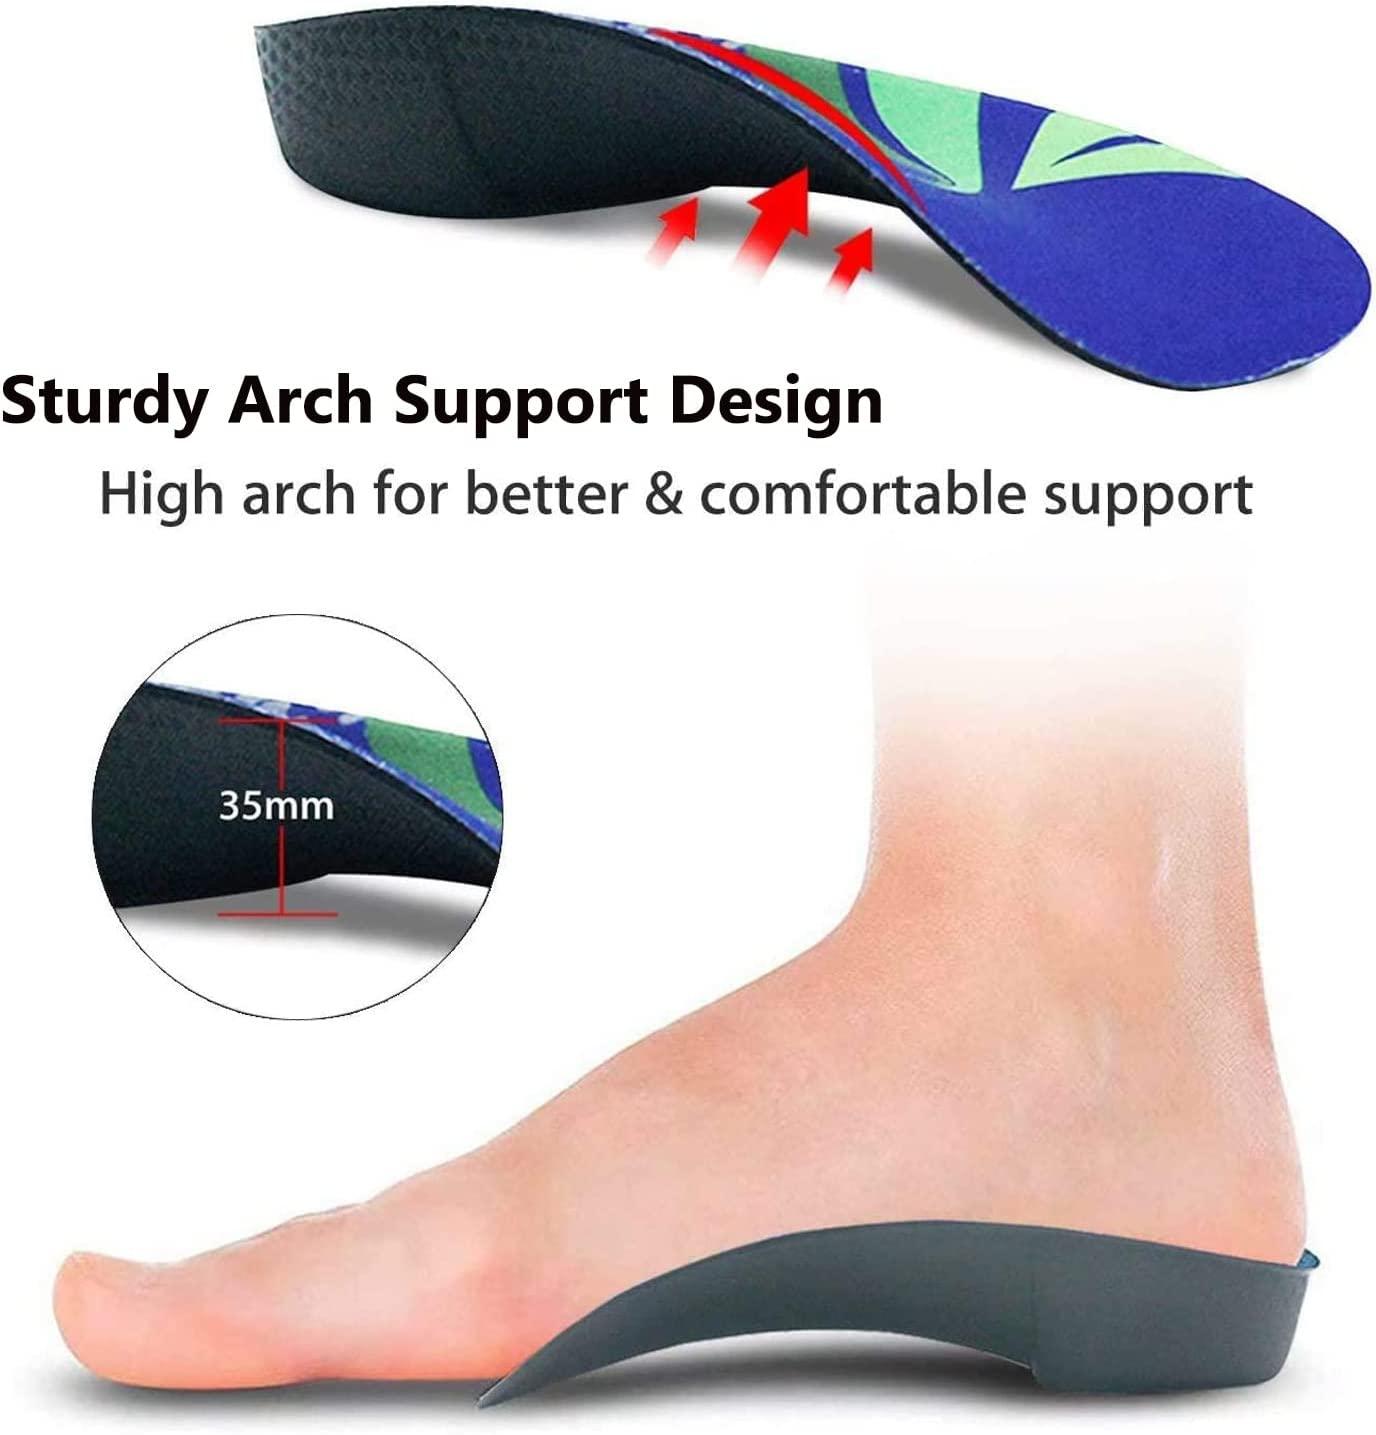 FitFeet High Arch Support Insoles,3/4 Length Orthotic Foot Inserts for ...